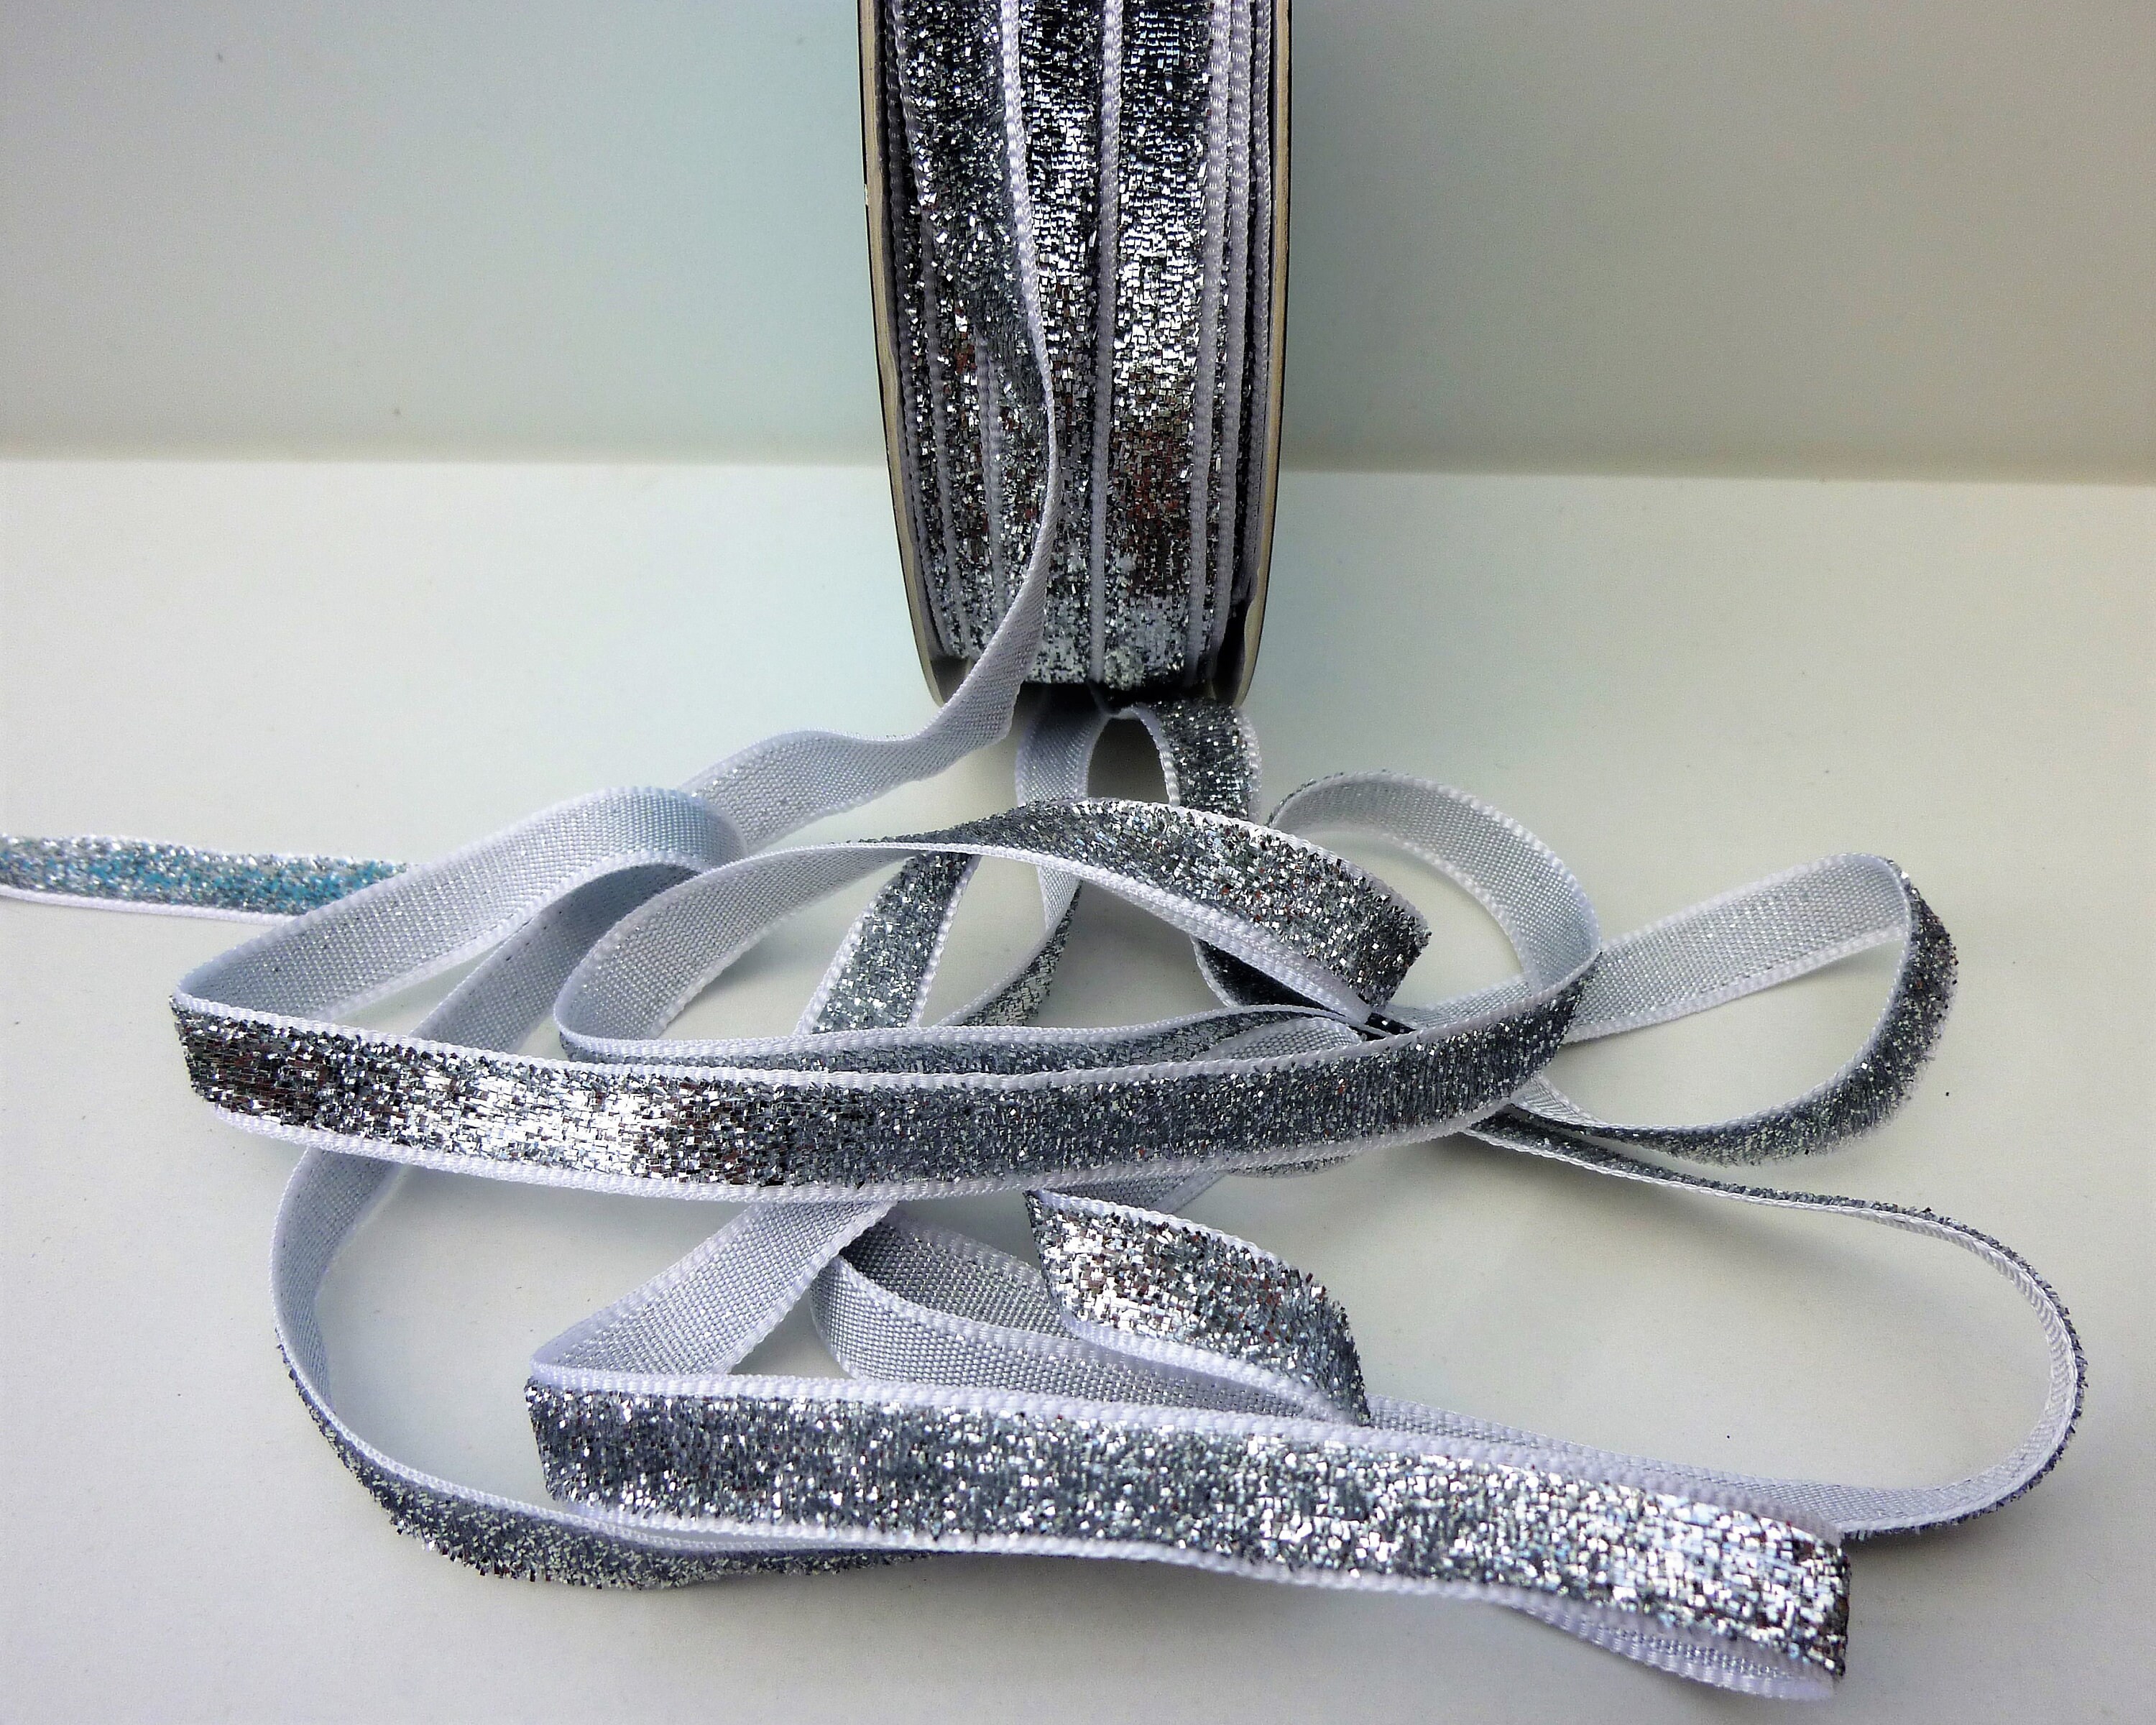 5 yds x 10mm Sparkly Glitter Velvet Ribbon ~ Crafts/Sewing/Christmas/Cards/Decor 